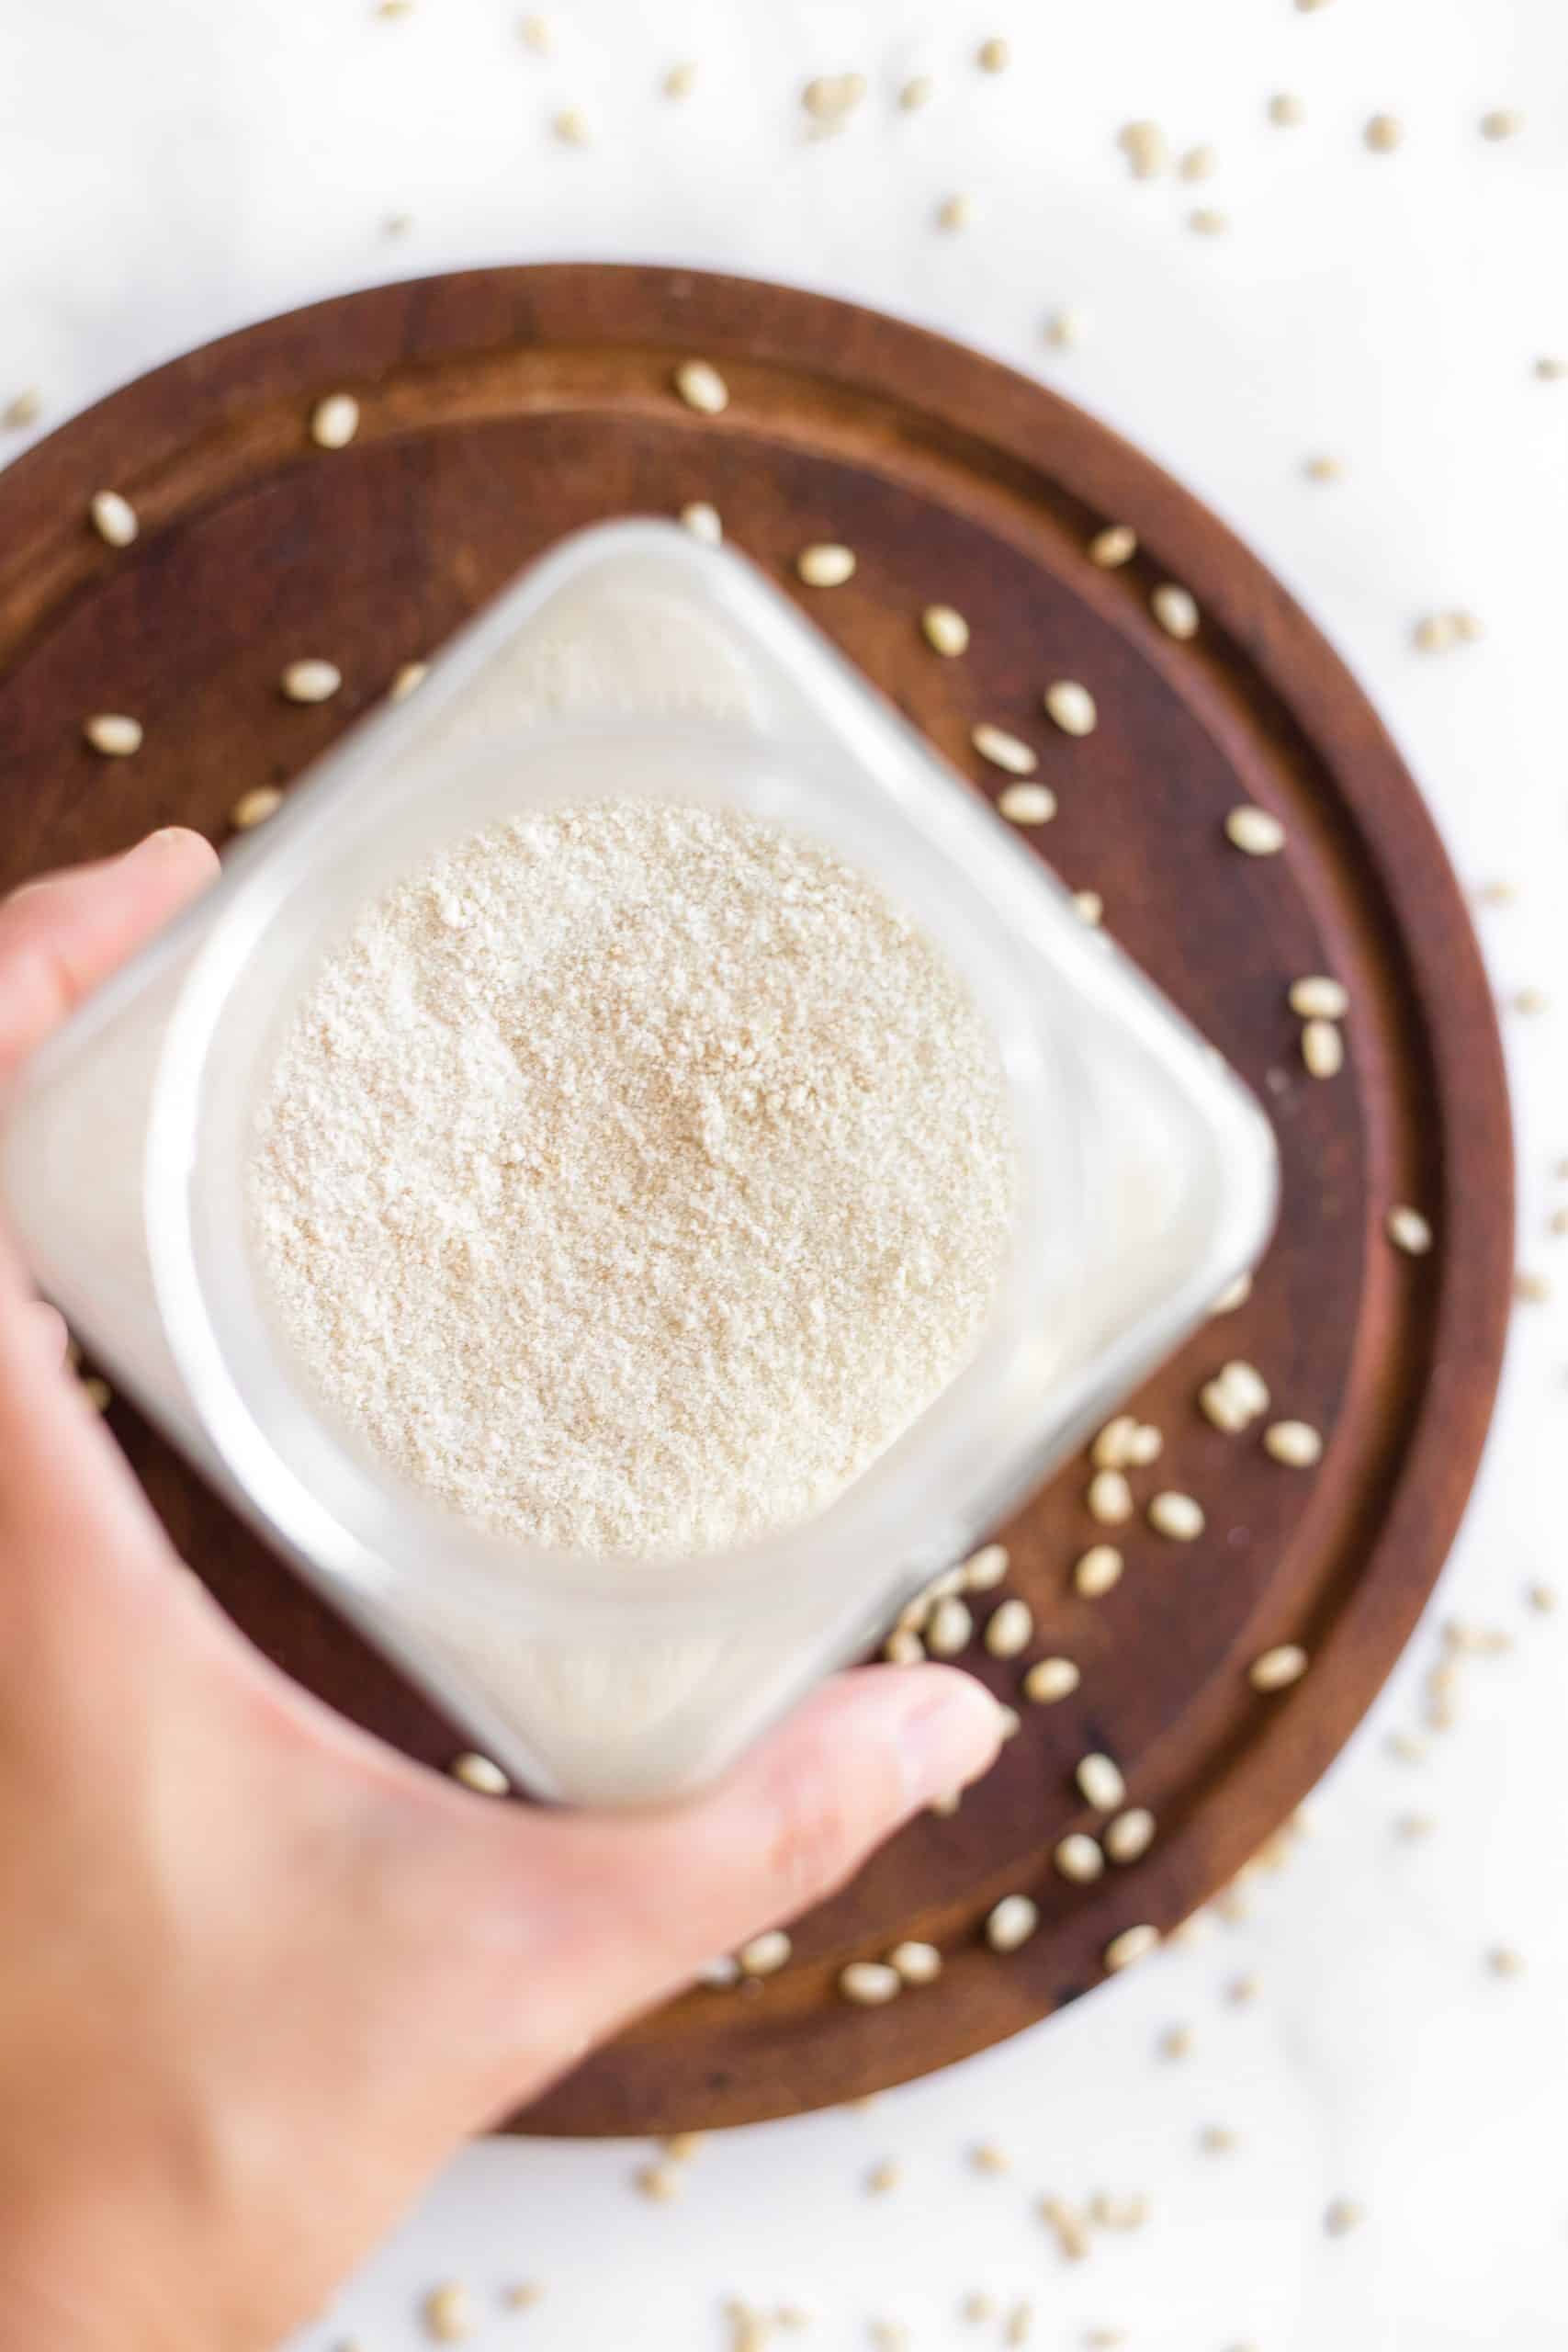 Rice flour in a jar on a round wooden board surrounded by rice grains.